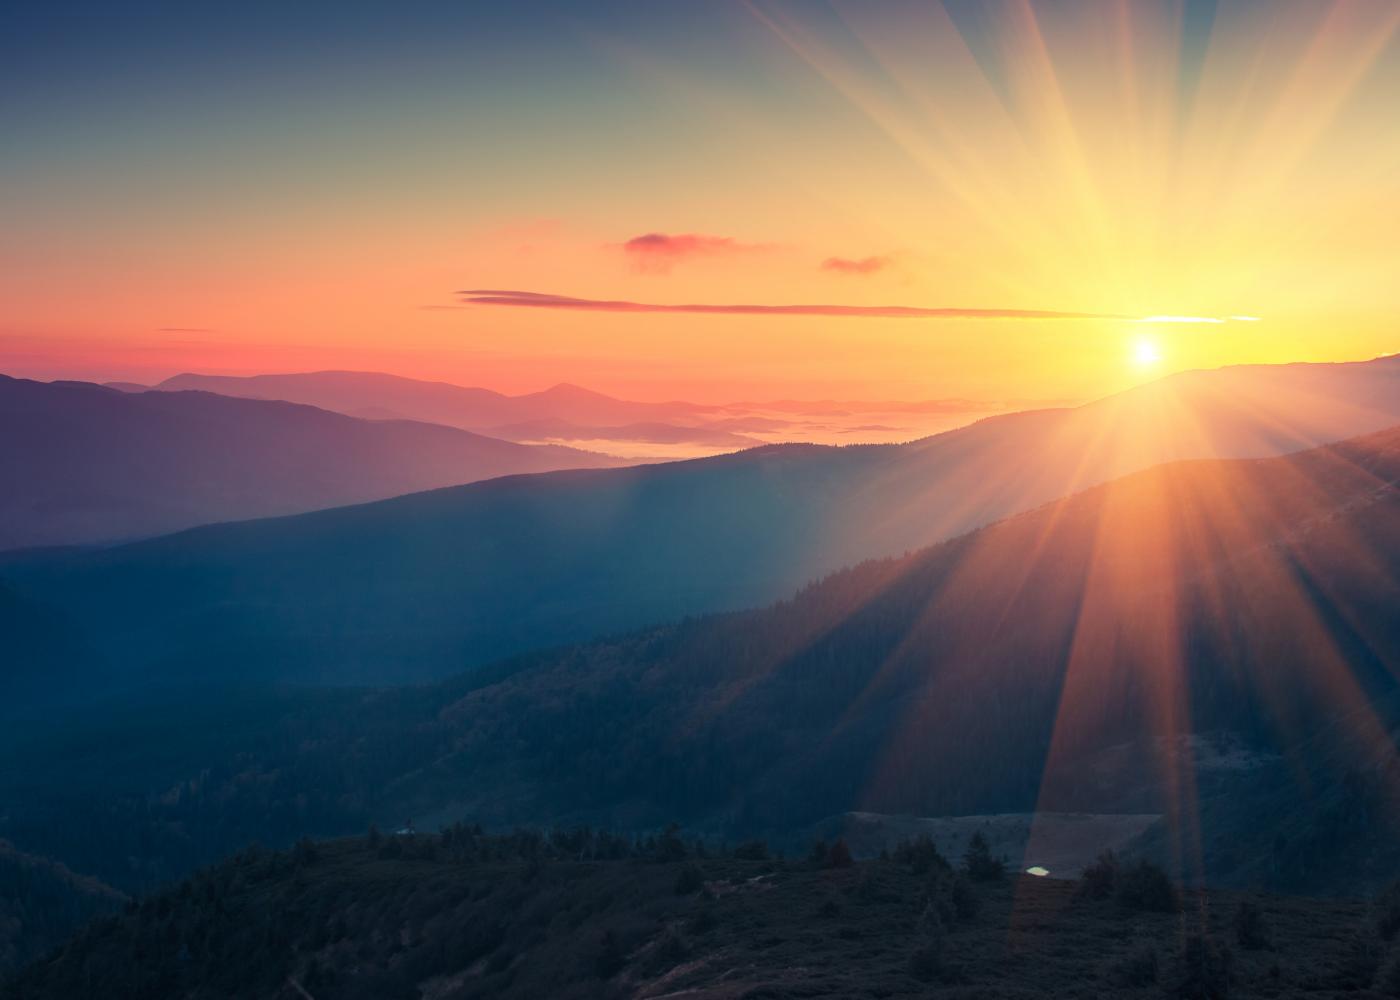 Stock photo of sunrise seen over mountains